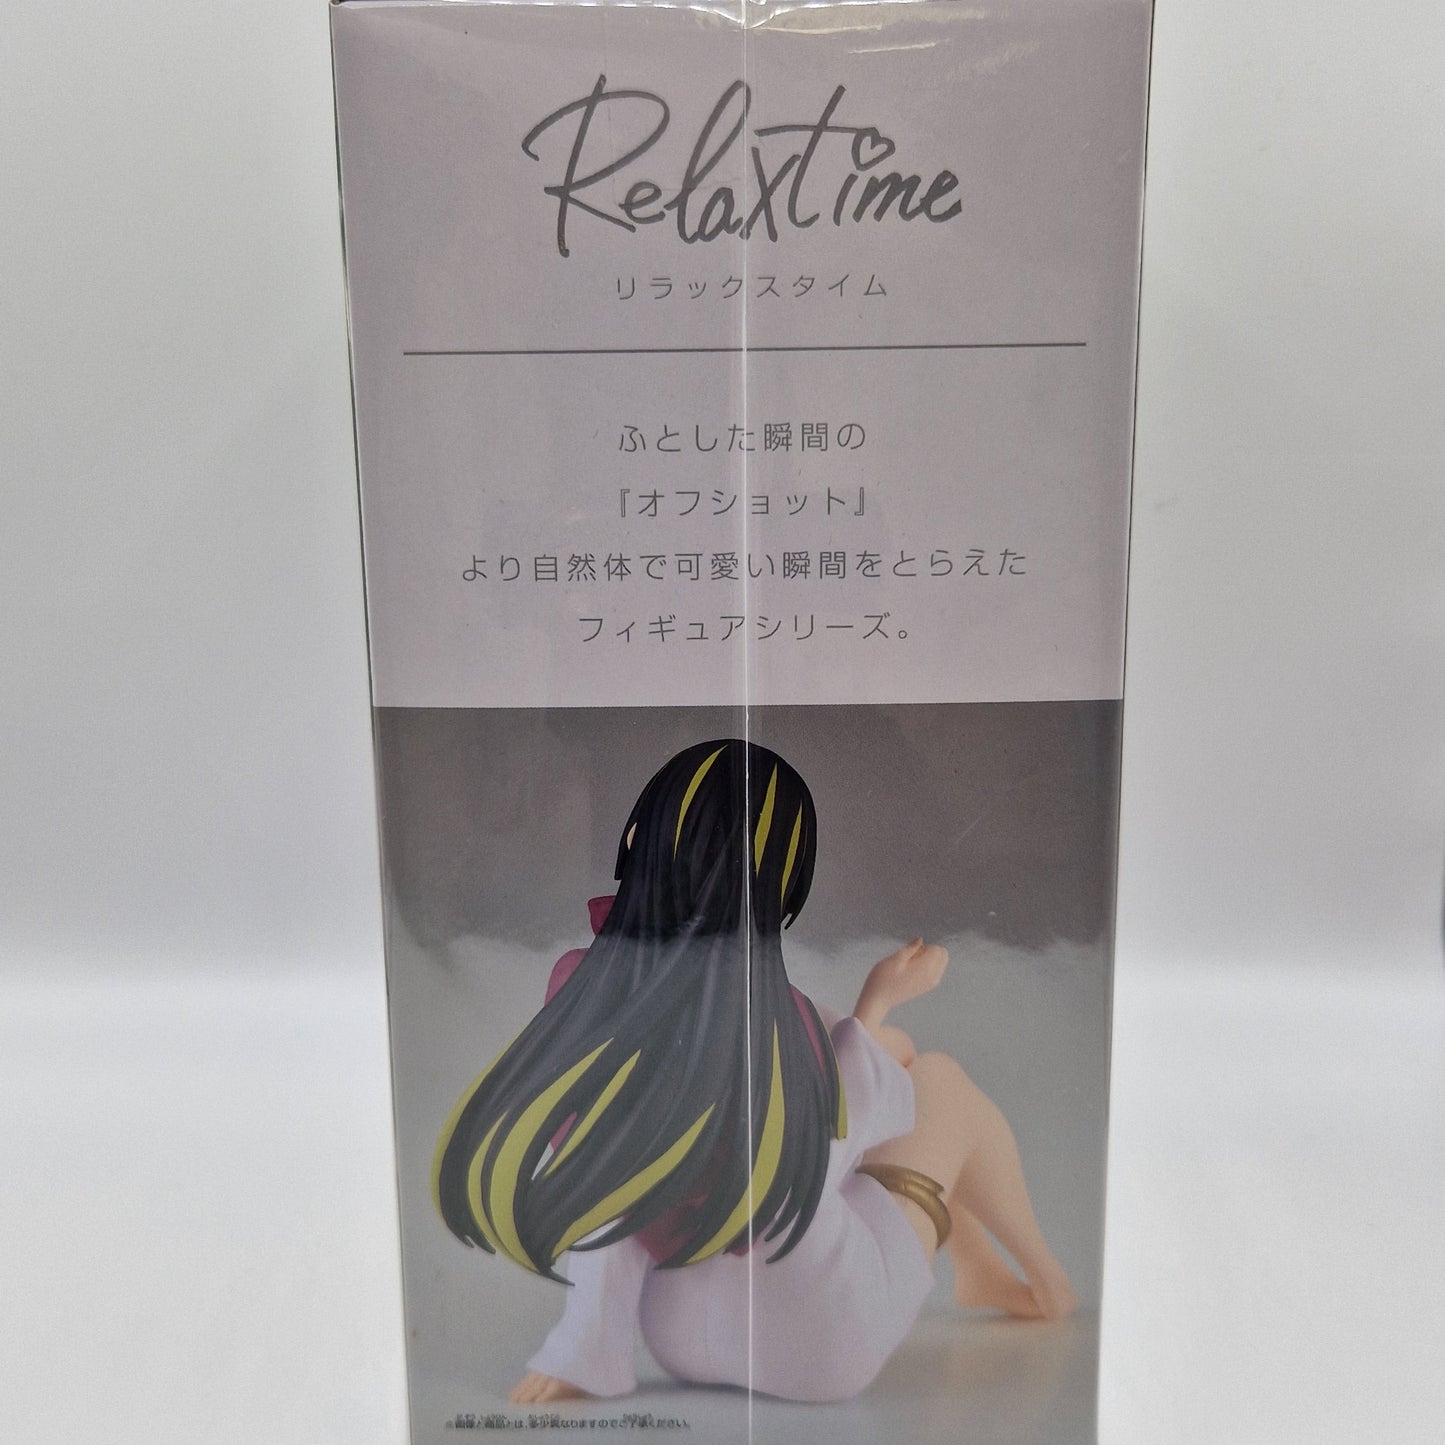 THAT TIME I GOT REINCARNATED AS A SLIME - ALBIS "RELAX TIME" PVC FIGURE